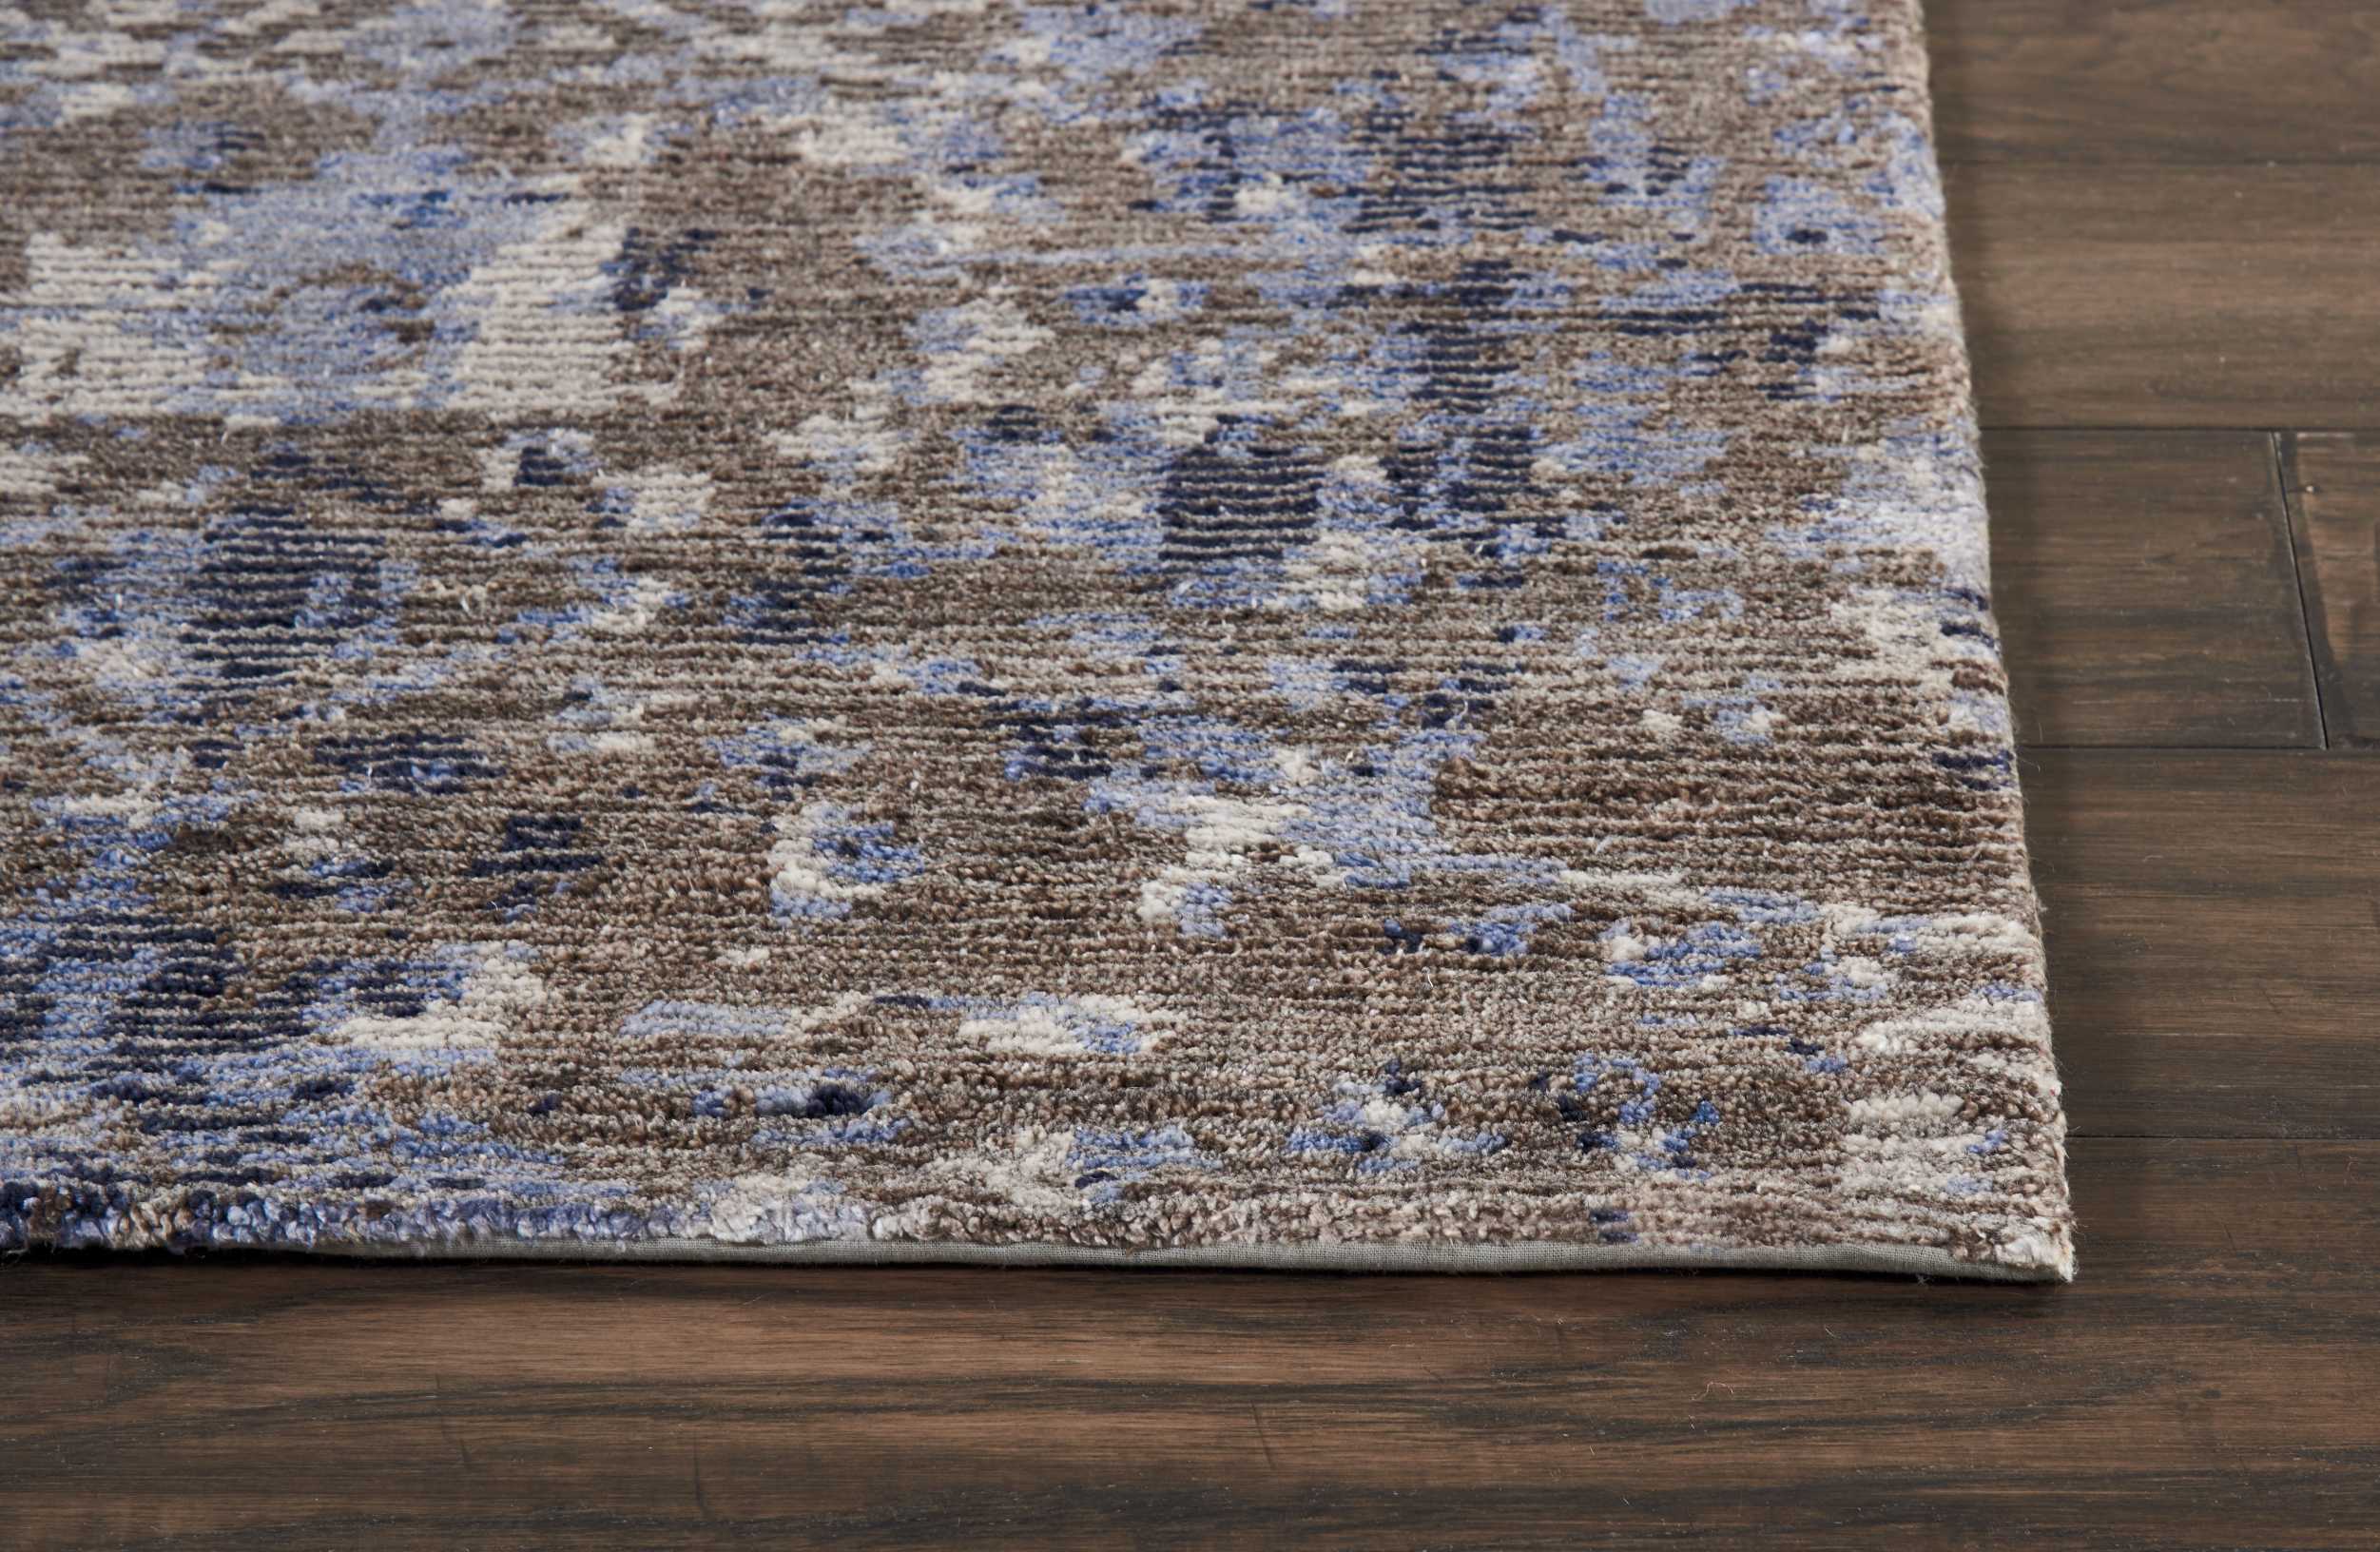 Close-up of textured area rug with abstract, distressed pattern.